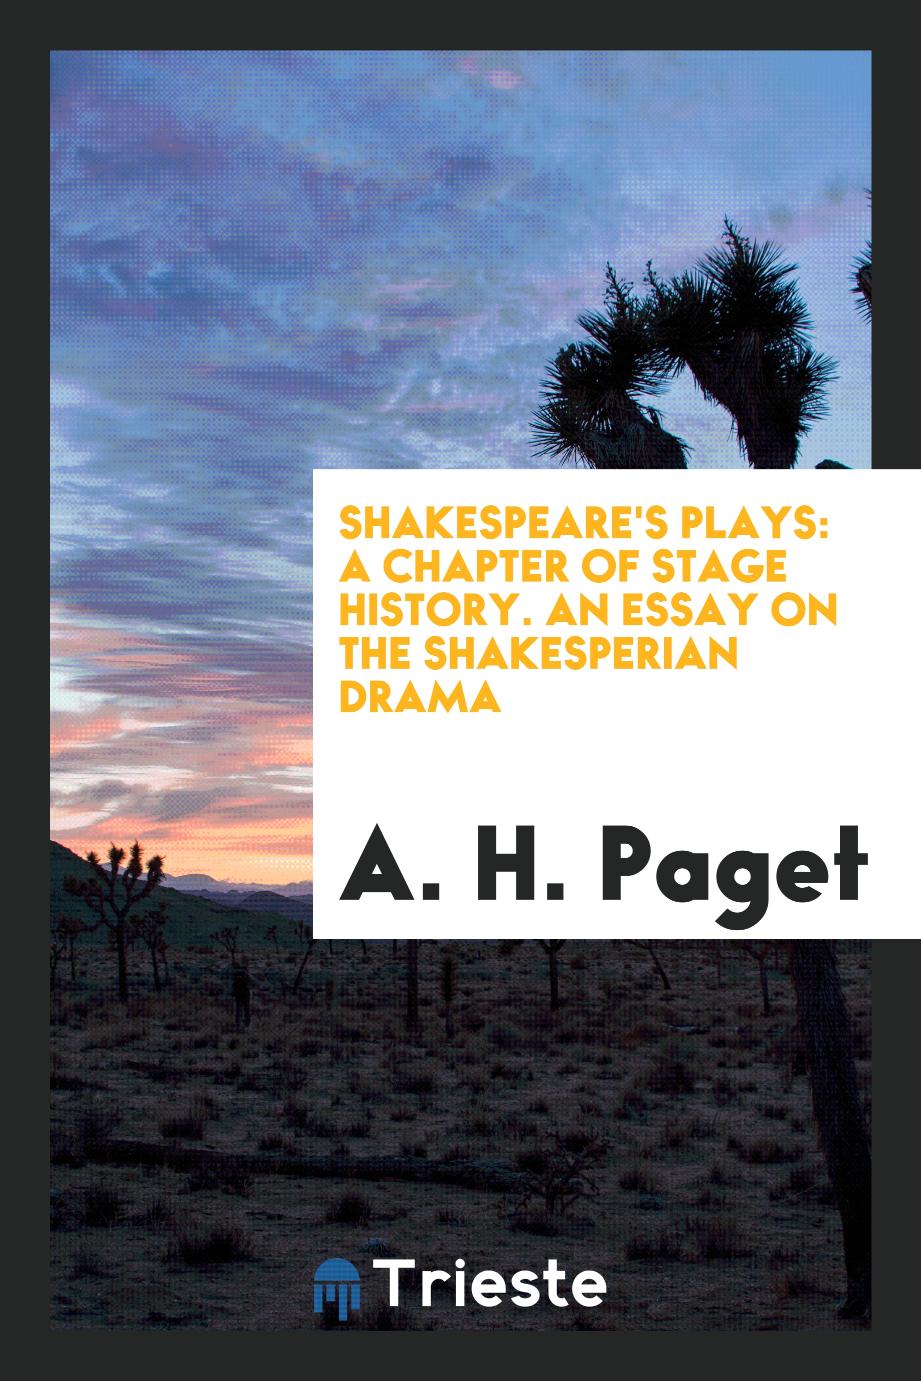 Shakespeare's plays: a chapter of stage history. An essay on the Shakesperian drama